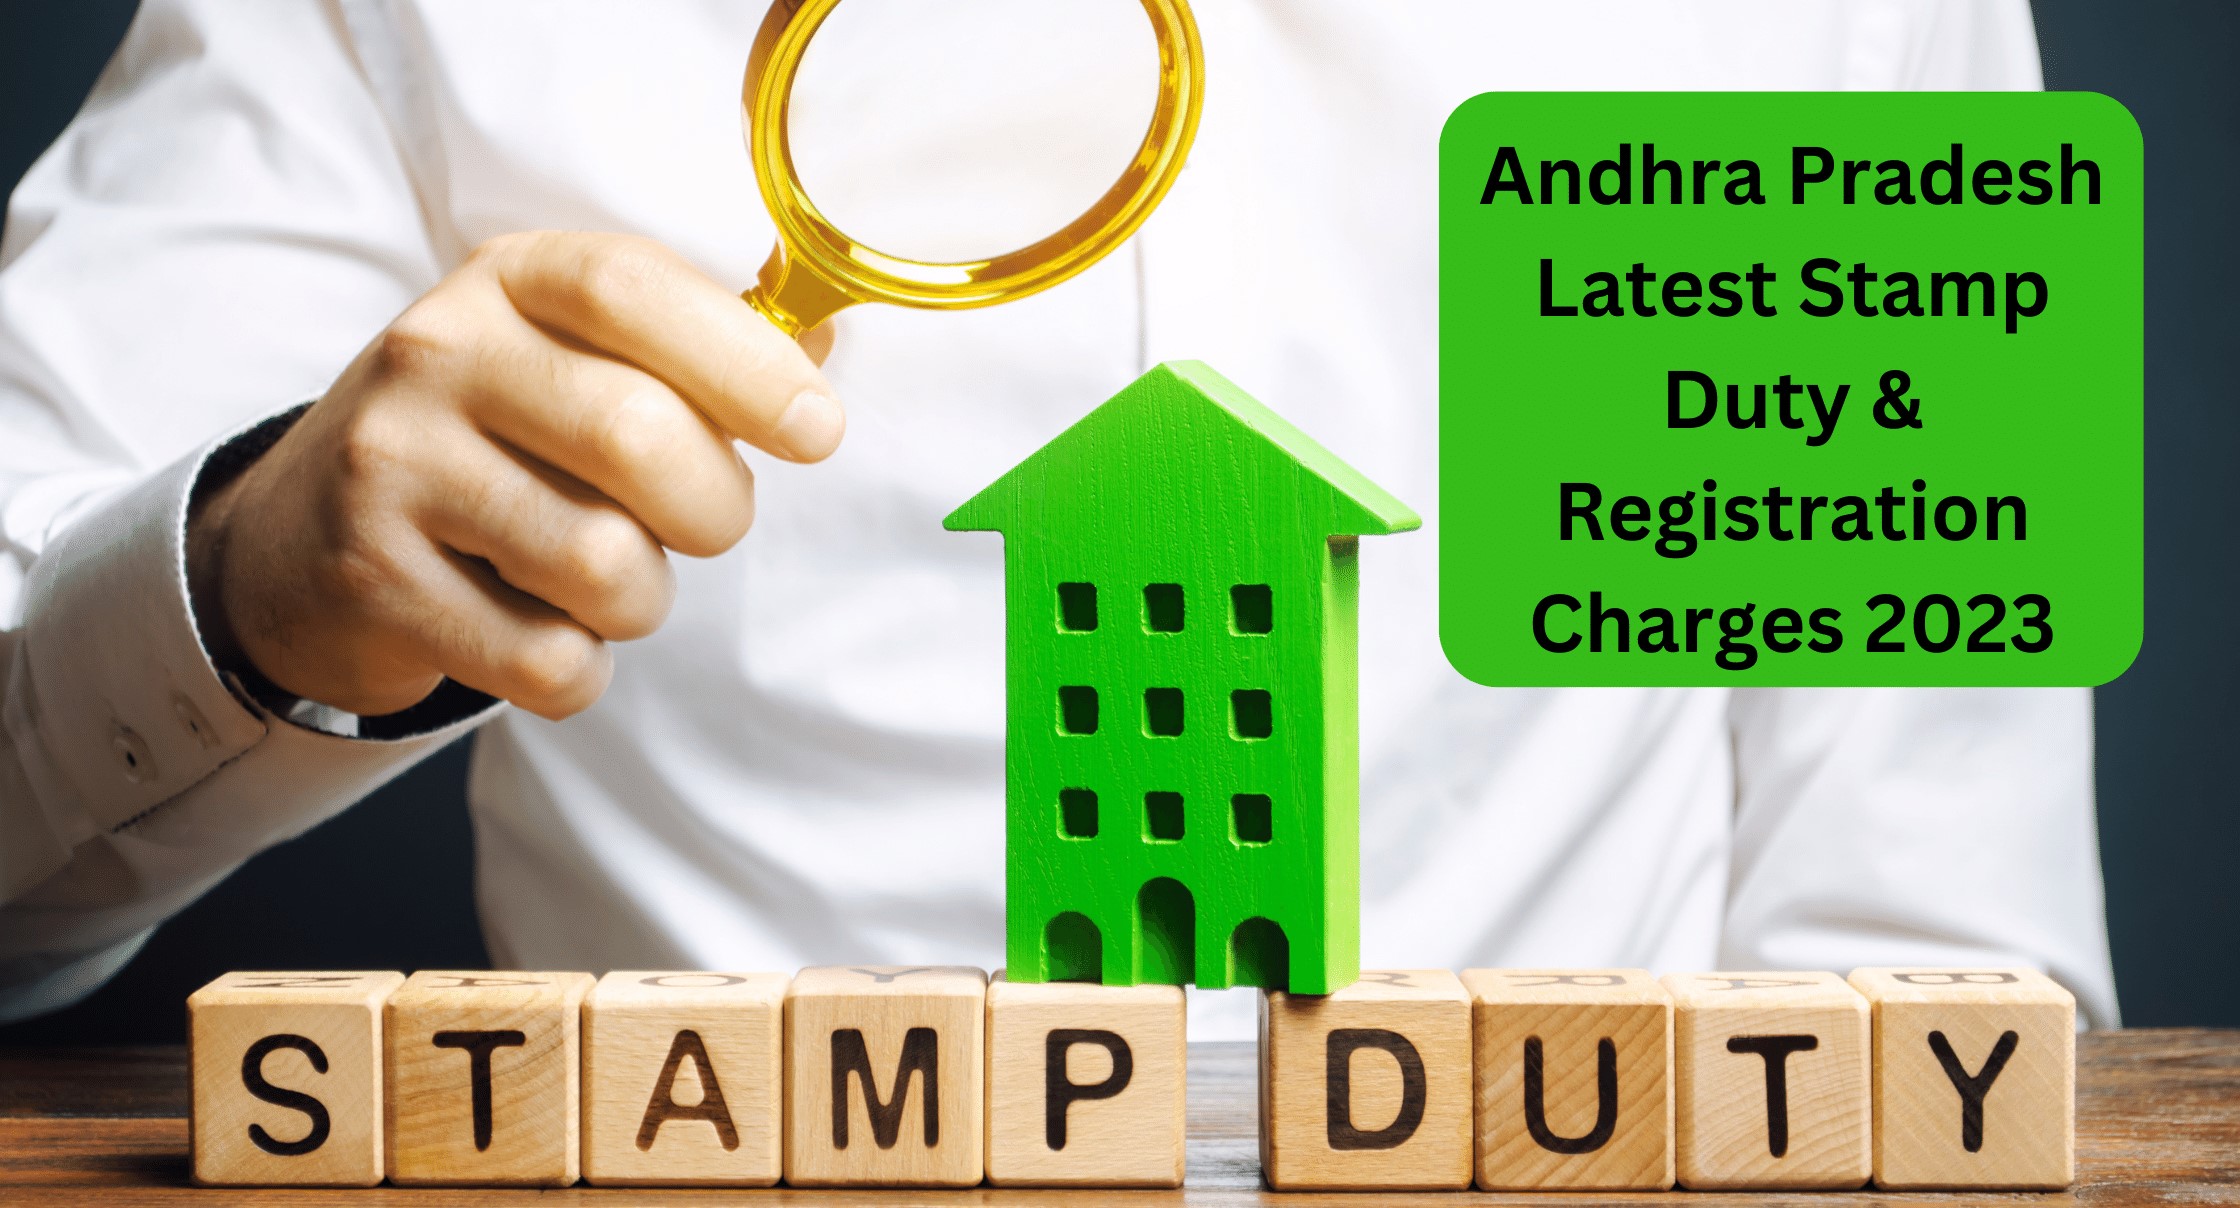 Andhra Pradesh: Latest Stamp Duty & Registration Charges 2023